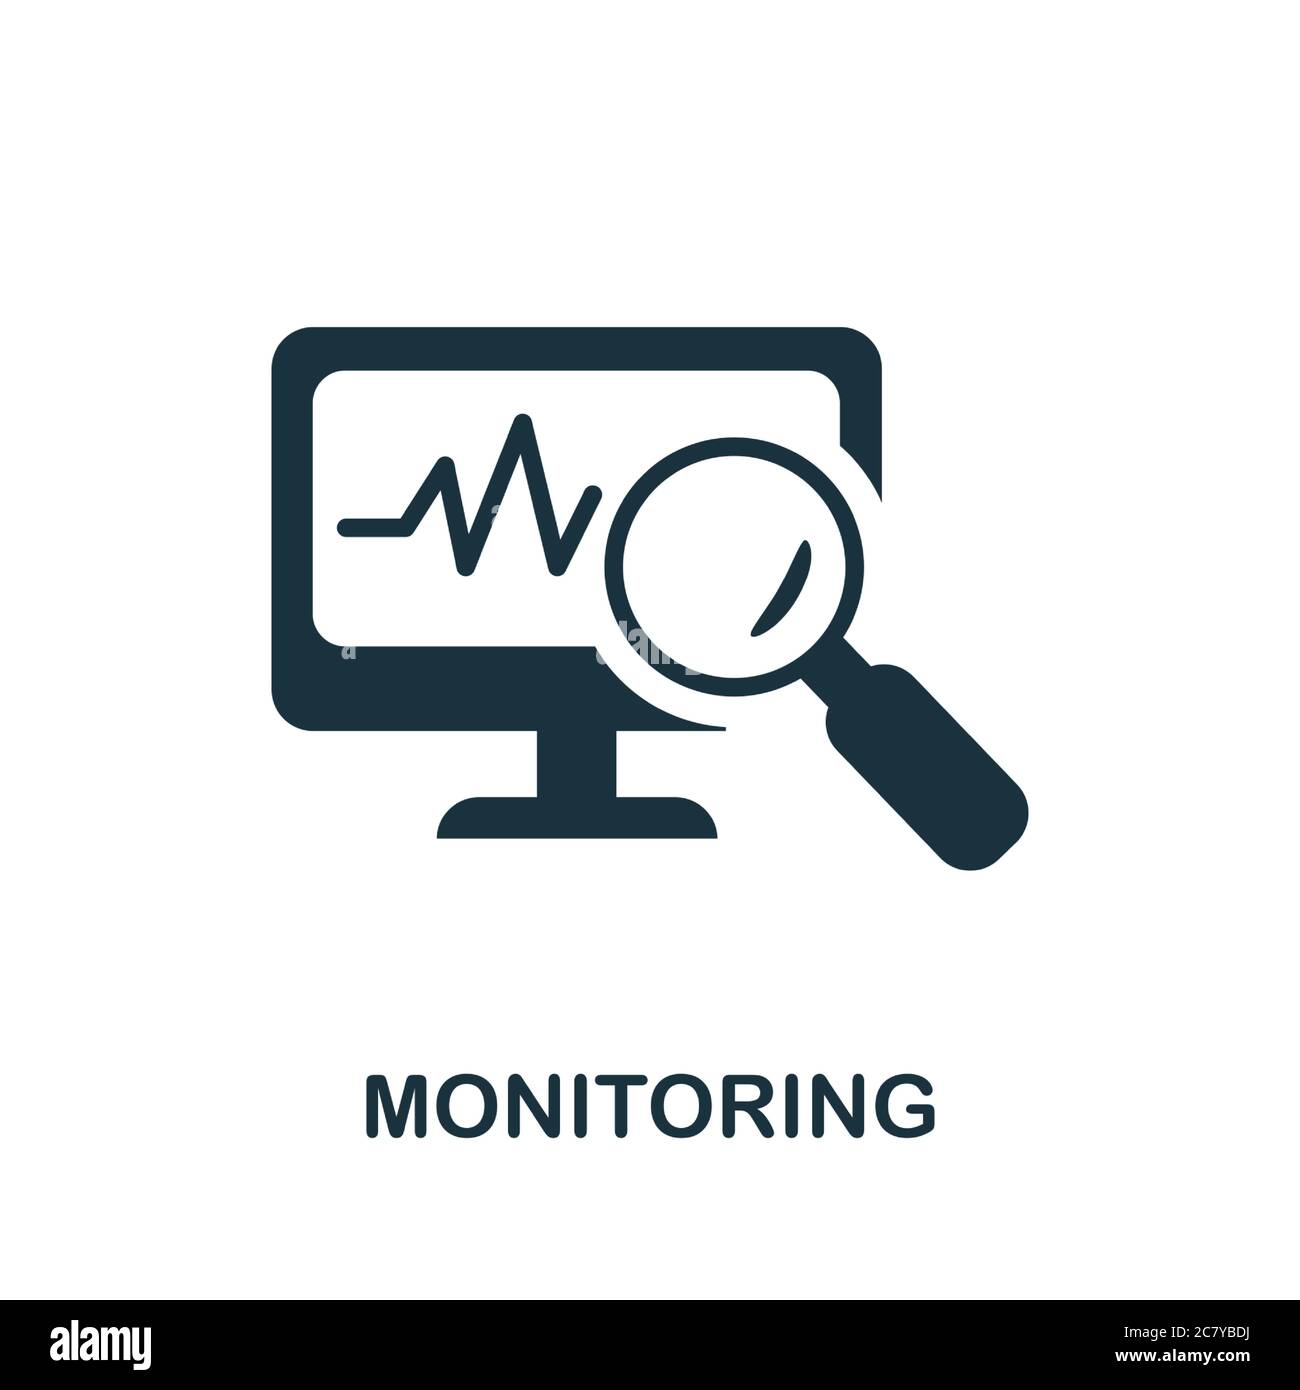 monitoring-icon-simple-element-from-internet-security-collection-creative-monitoring-icon-for-web-design-templates-infographics-and-more-2c7ybdj.jpg